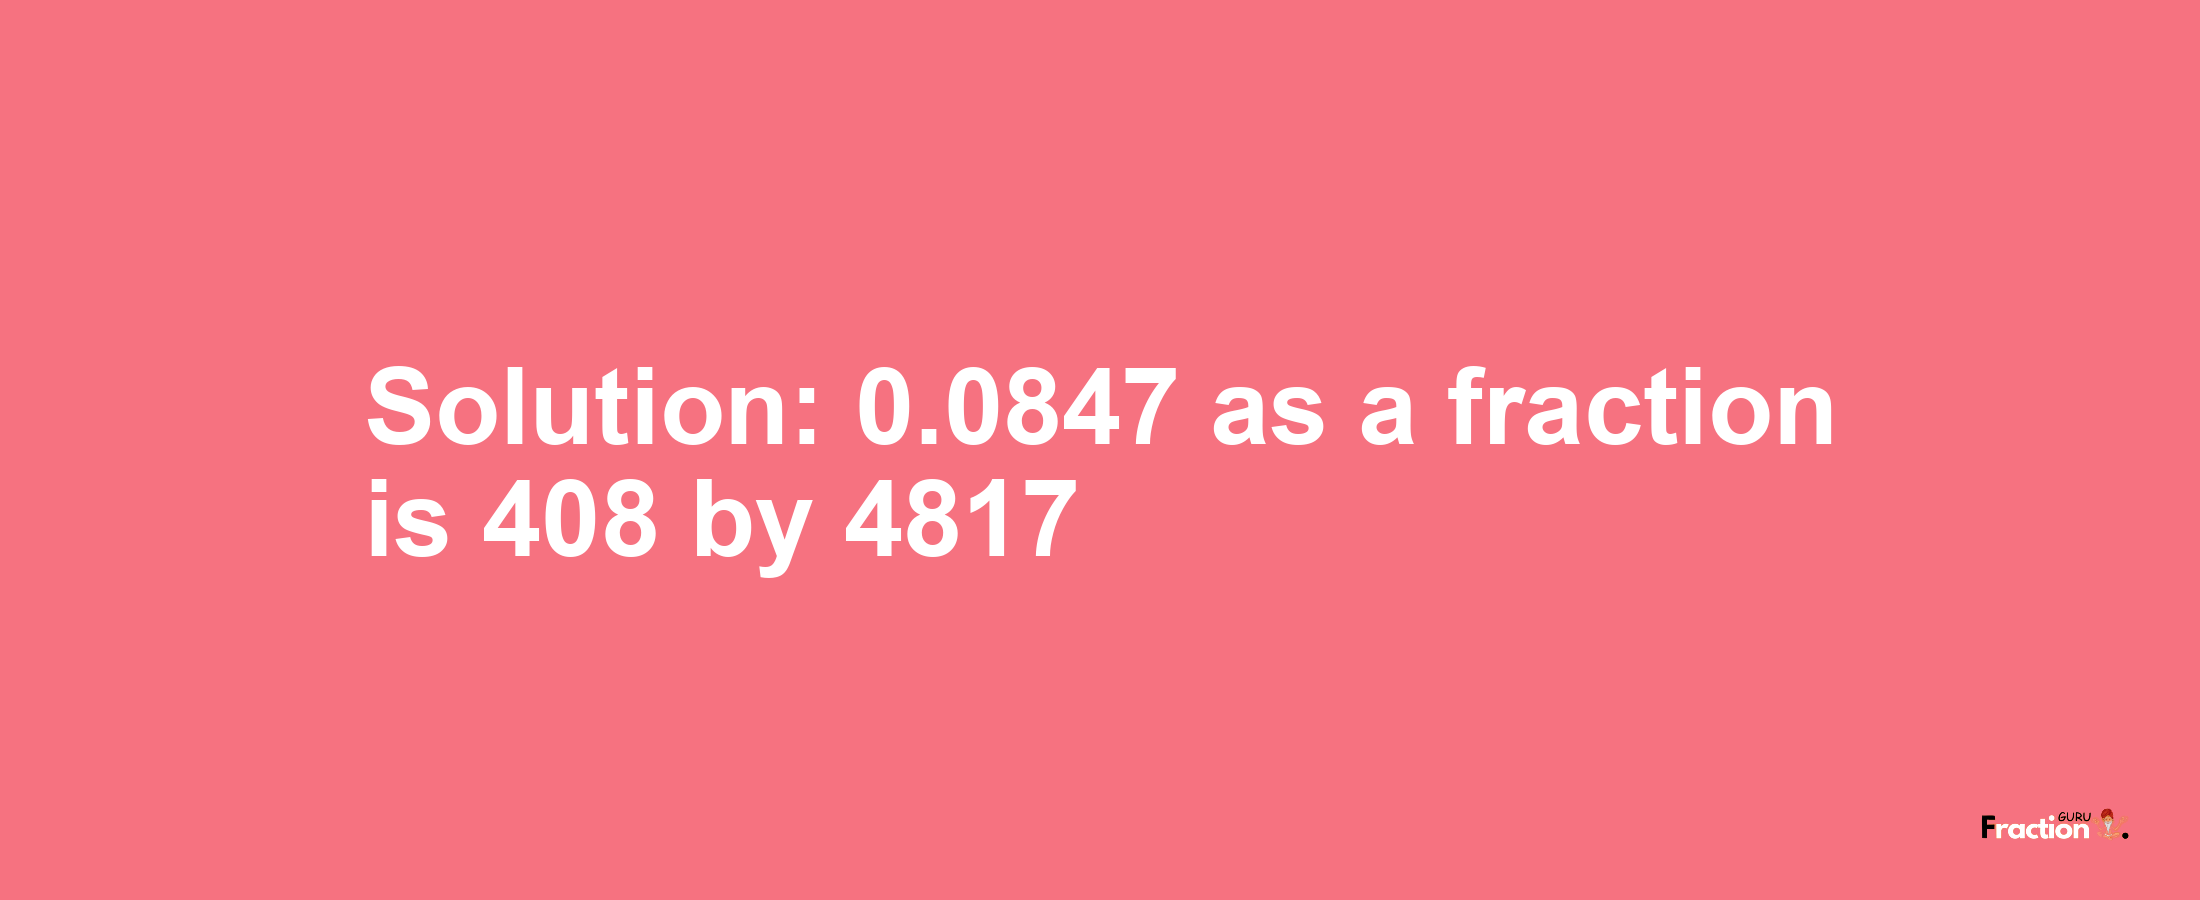 Solution:0.0847 as a fraction is 408/4817